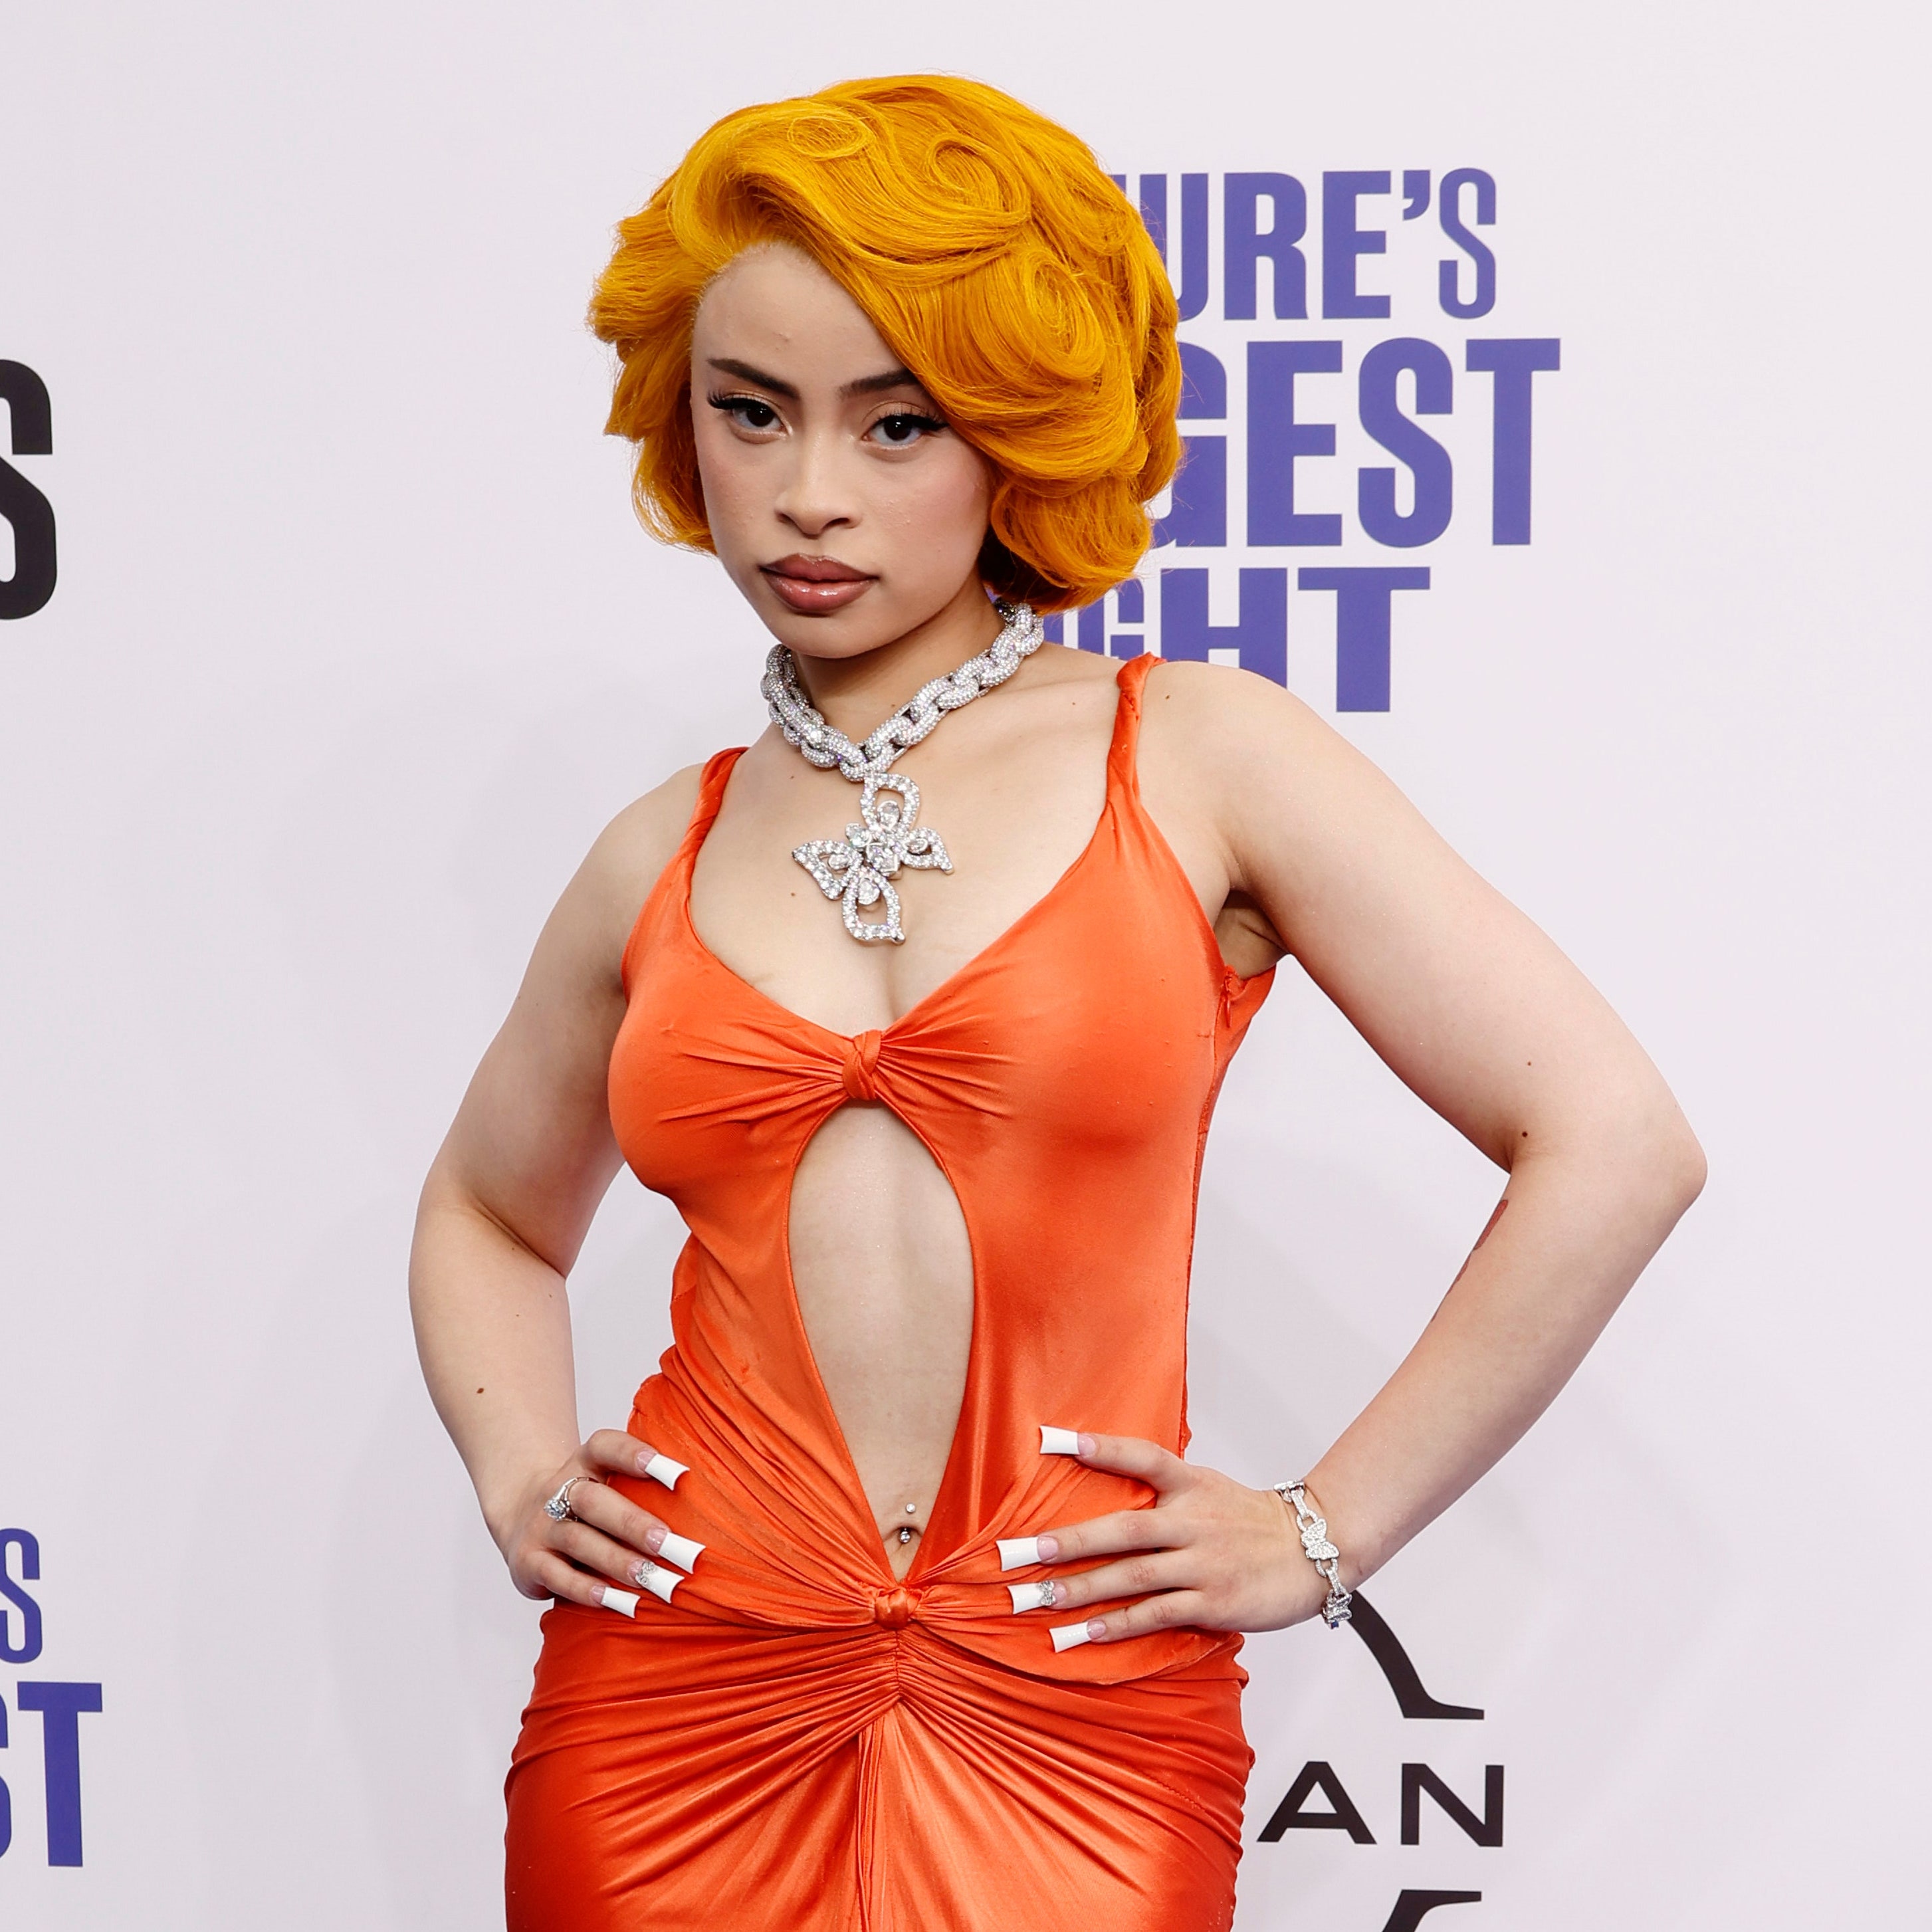 Ice Spice Brings a Vintage Runway Look to the BET Awards